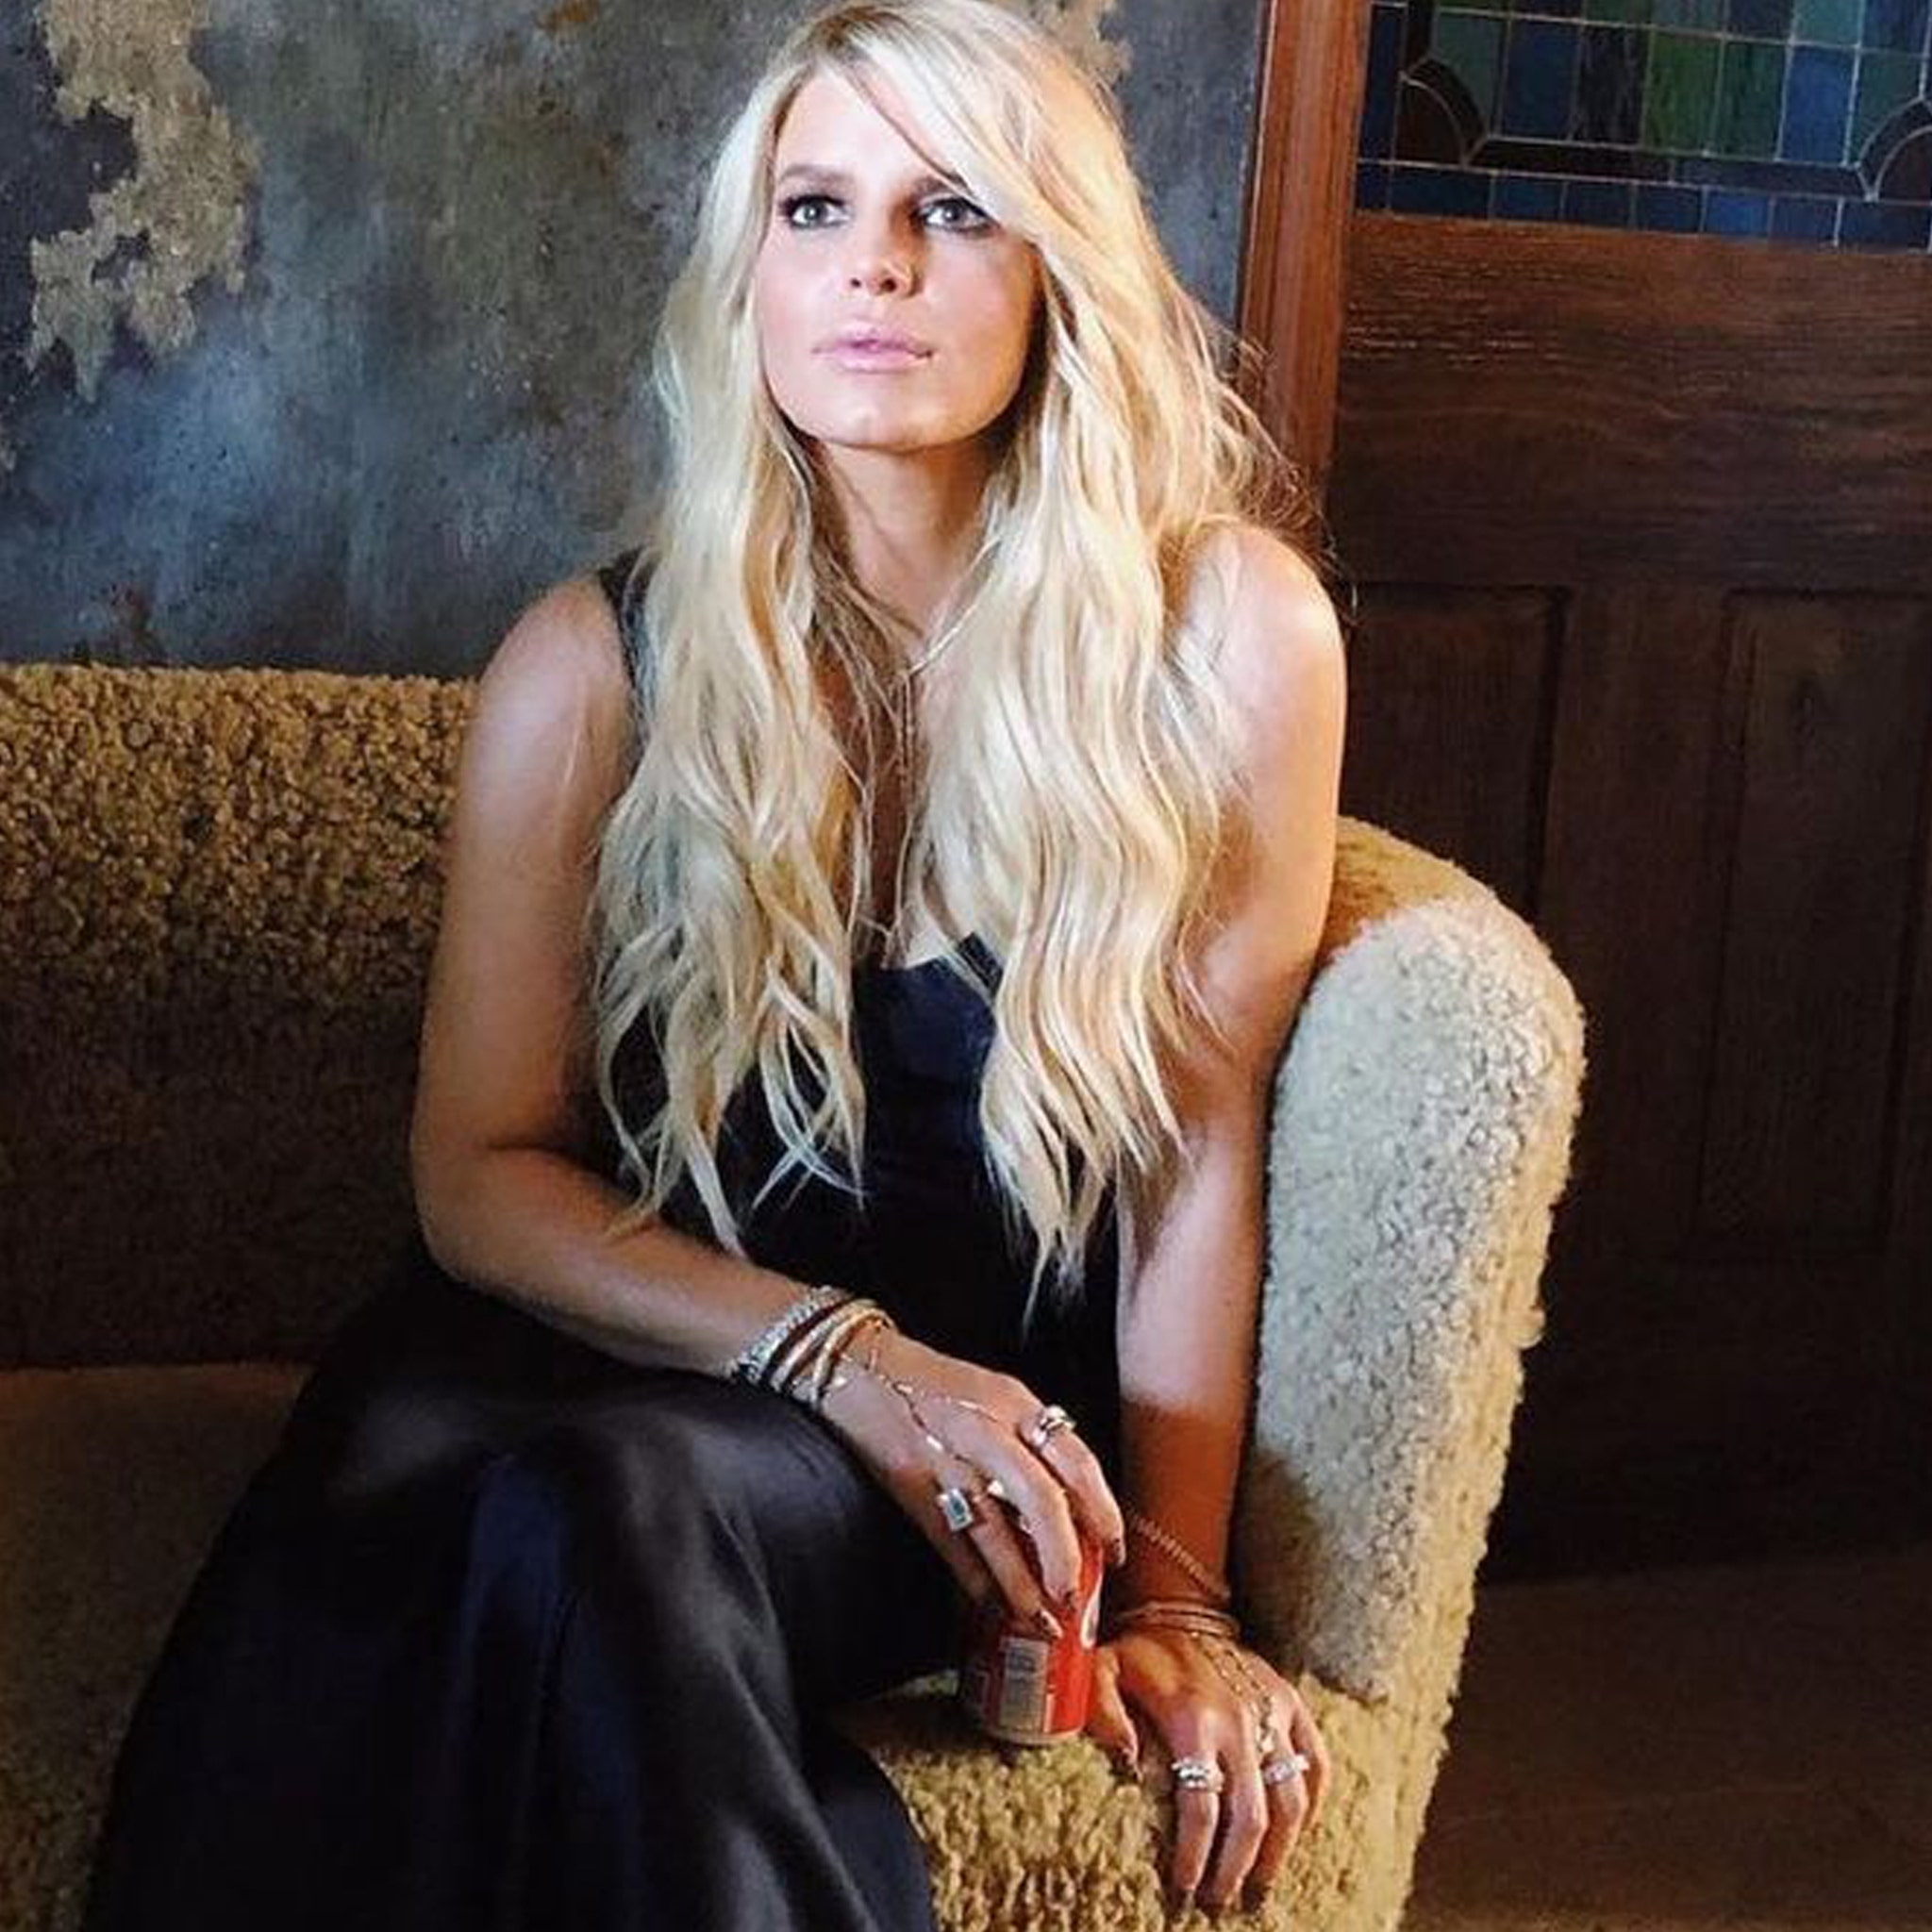 Jessica Simpson gets candid on alcoholism with 'unrecognizable' photo